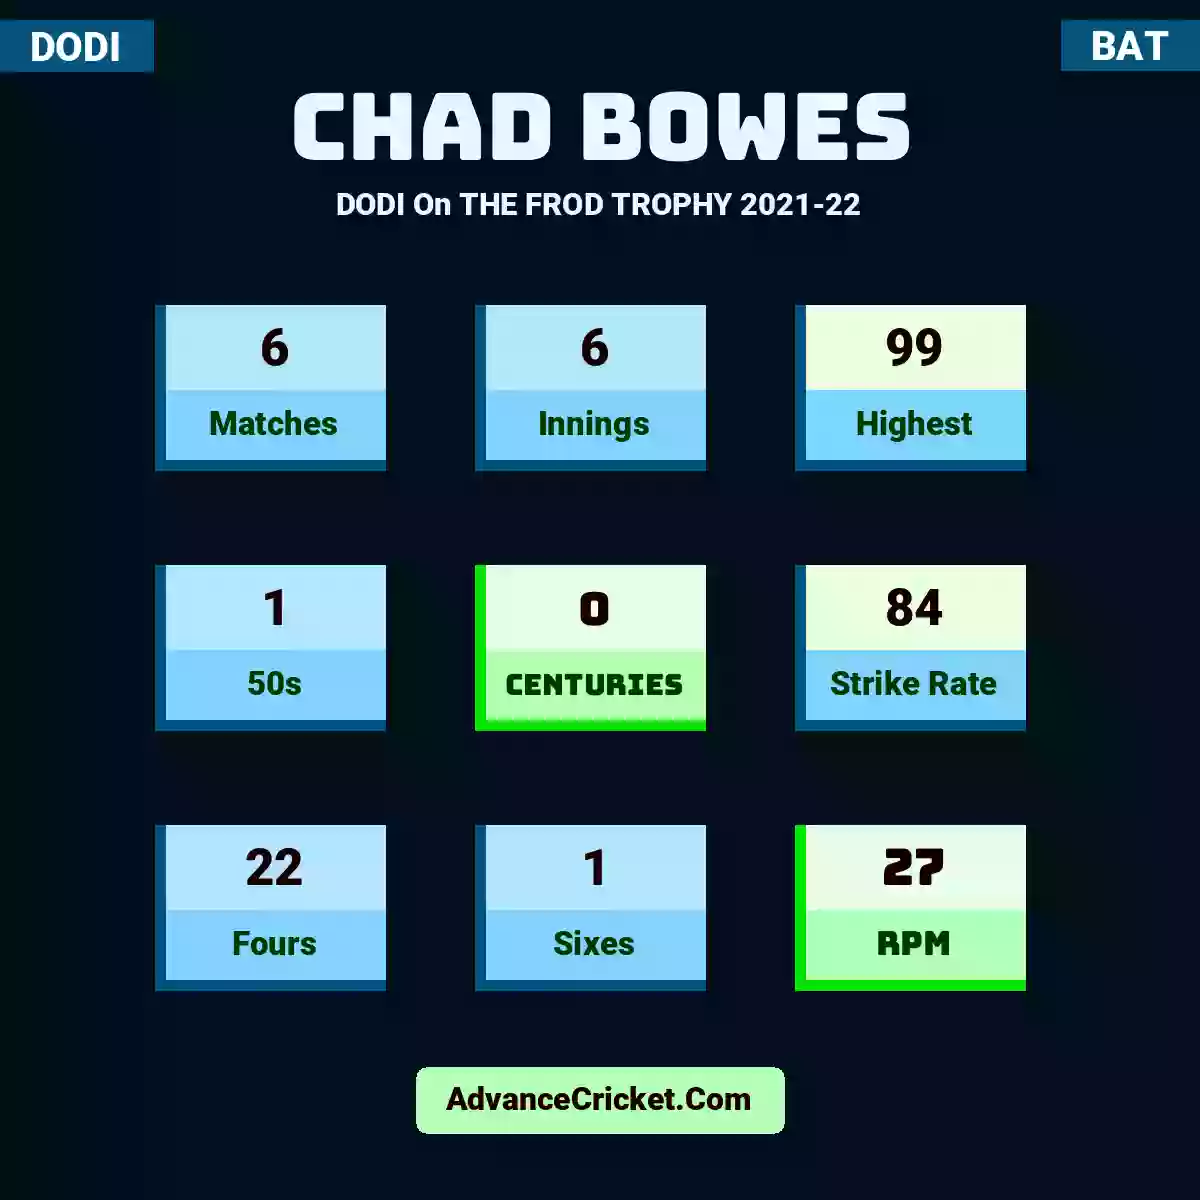 Chad Bowes DODI  On THE FROD TROPHY 2021-22, Chad Bowes played 6 matches, scored 99 runs as highest, 1 half-centuries, and 0 centuries, with a strike rate of 84. C.Bowes hit 22 fours and 1 sixes, with an RPM of 27.